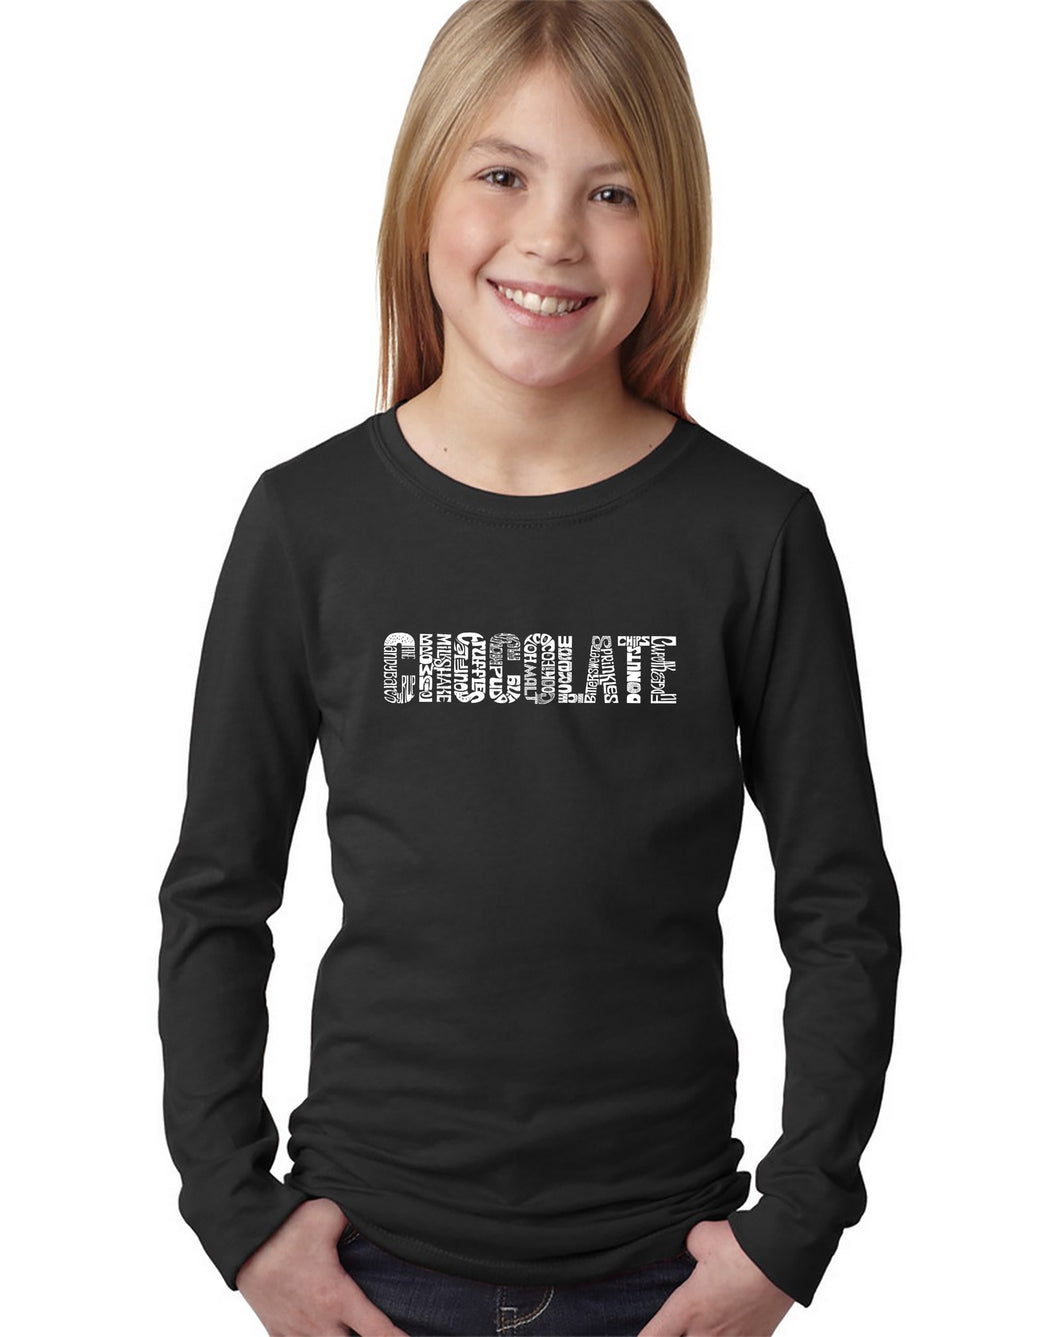 LA Pop Art Girl's Word Art Long Sleeve - Different foods made with chocolate